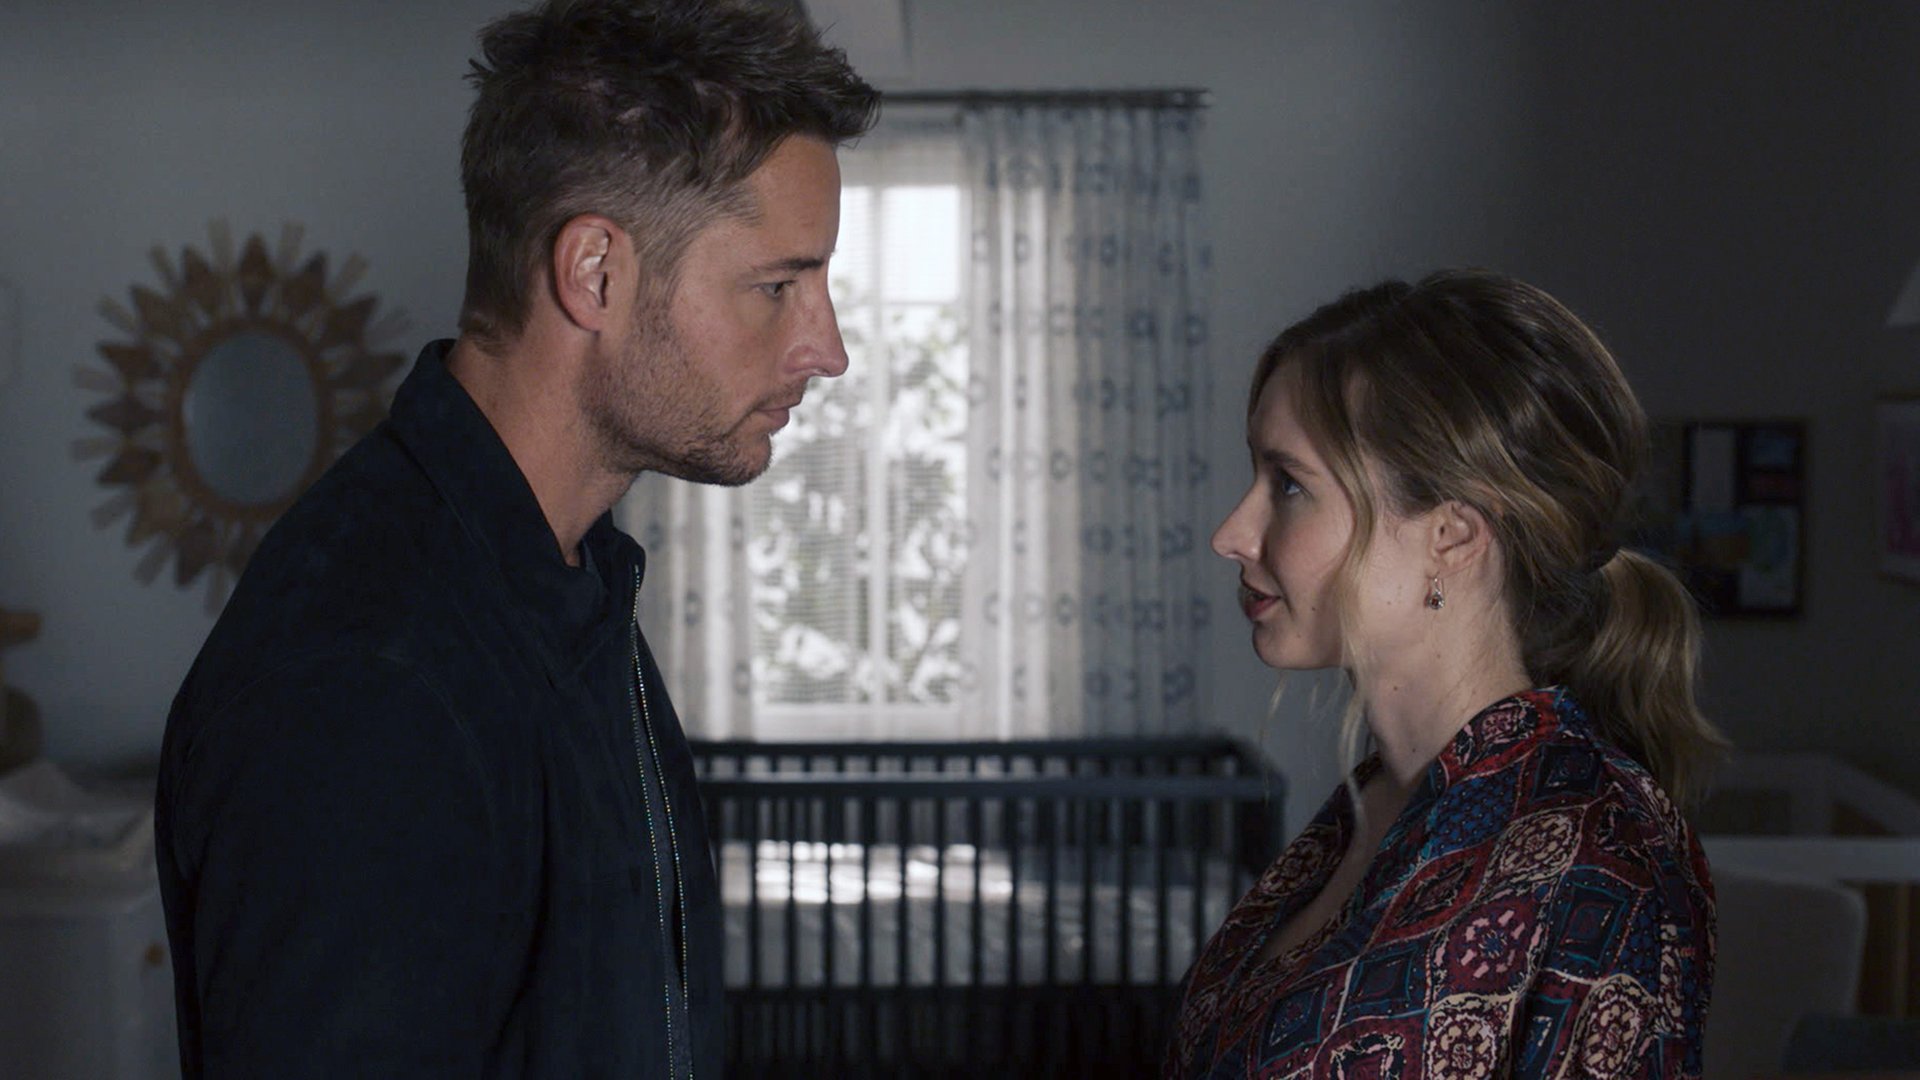 Justin Hartley as Kevin and Caitlin Thompson as Madison on 'This Is Us' Season 5 Episode 5